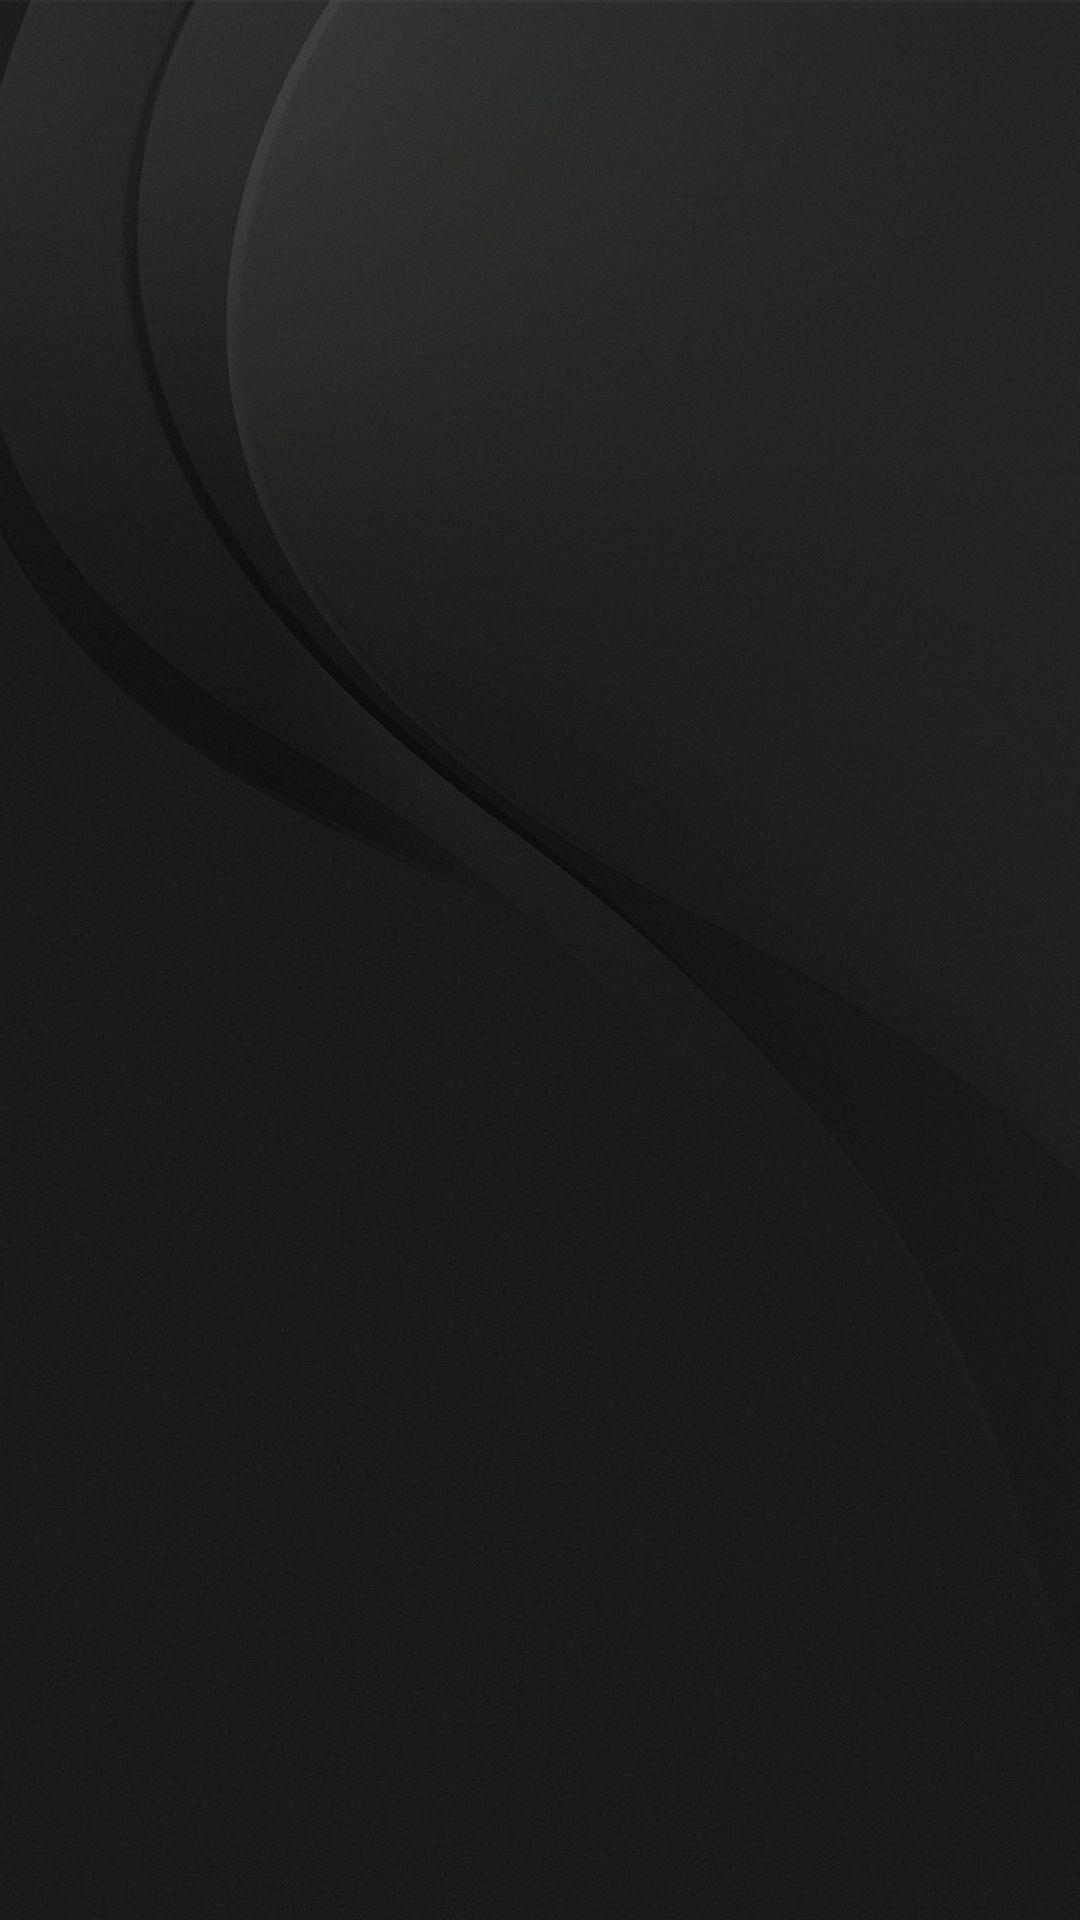 Hd Black Wallpapers For Mobile Wallpaper Cave